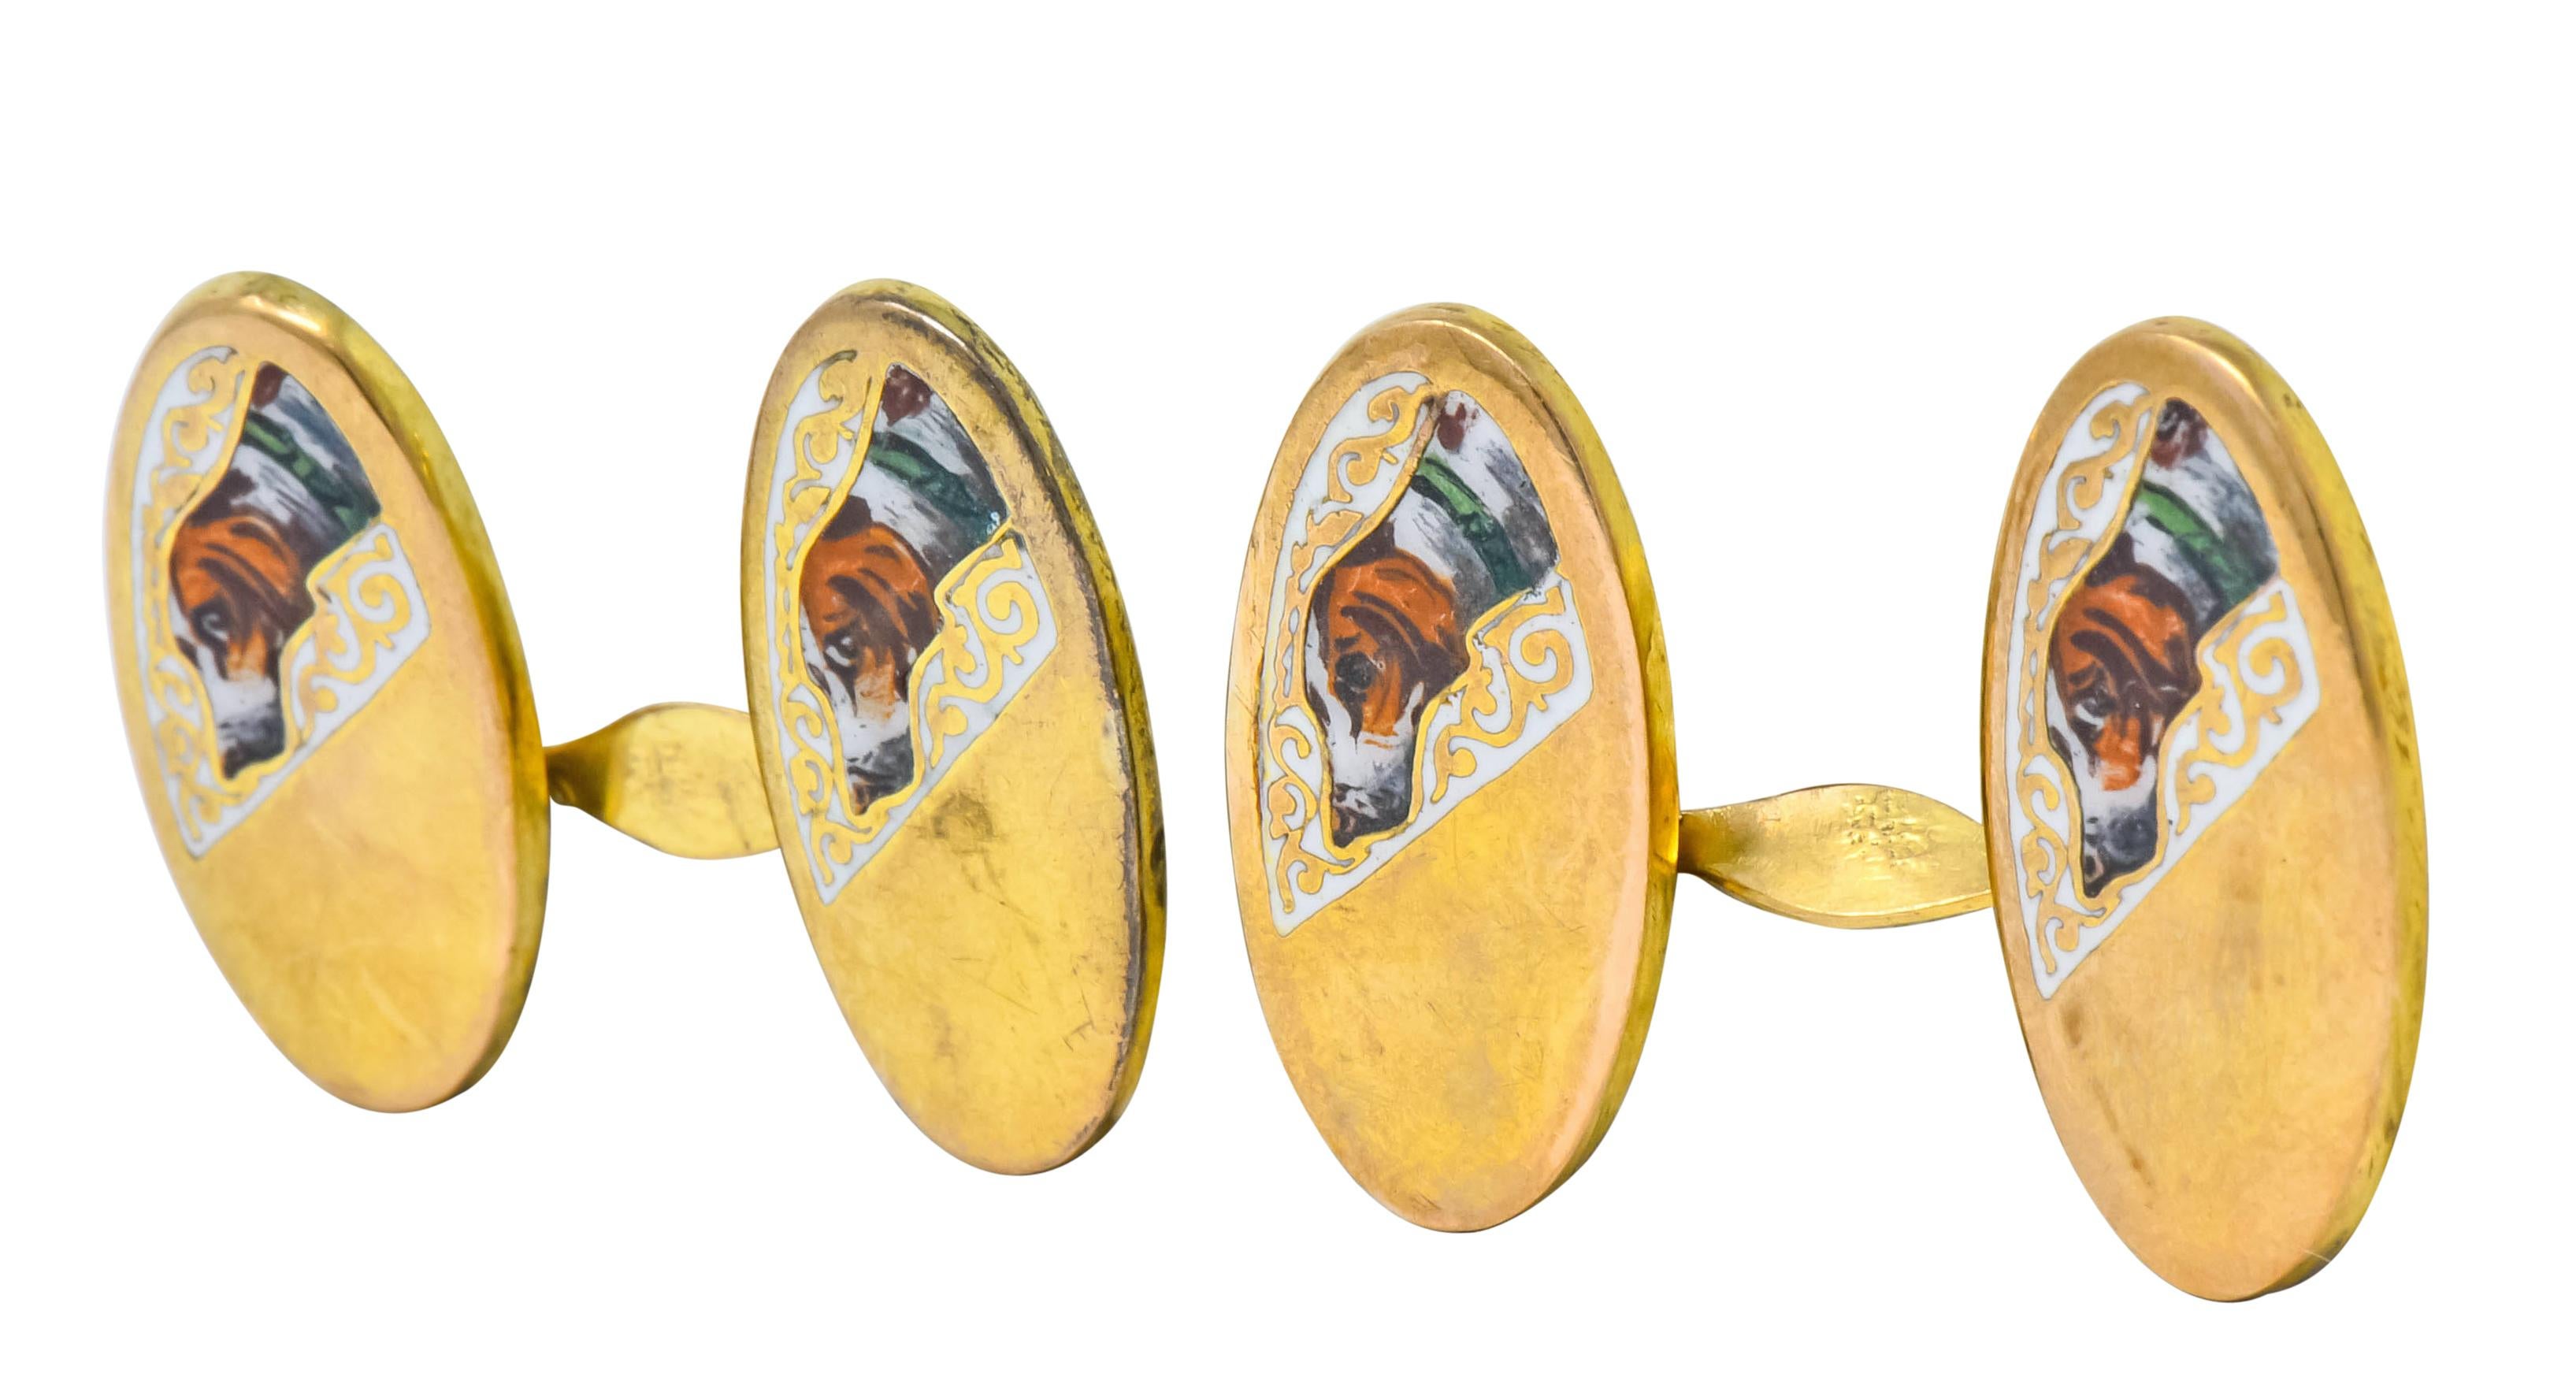 Twisted link style cufflinks terminating on each end as a gold oval bisected by enamel and a polished gold finish

Enamel depicts a finely detailed beagle dog against a white enamel background with a scrolling gold design

With some loss, consistent